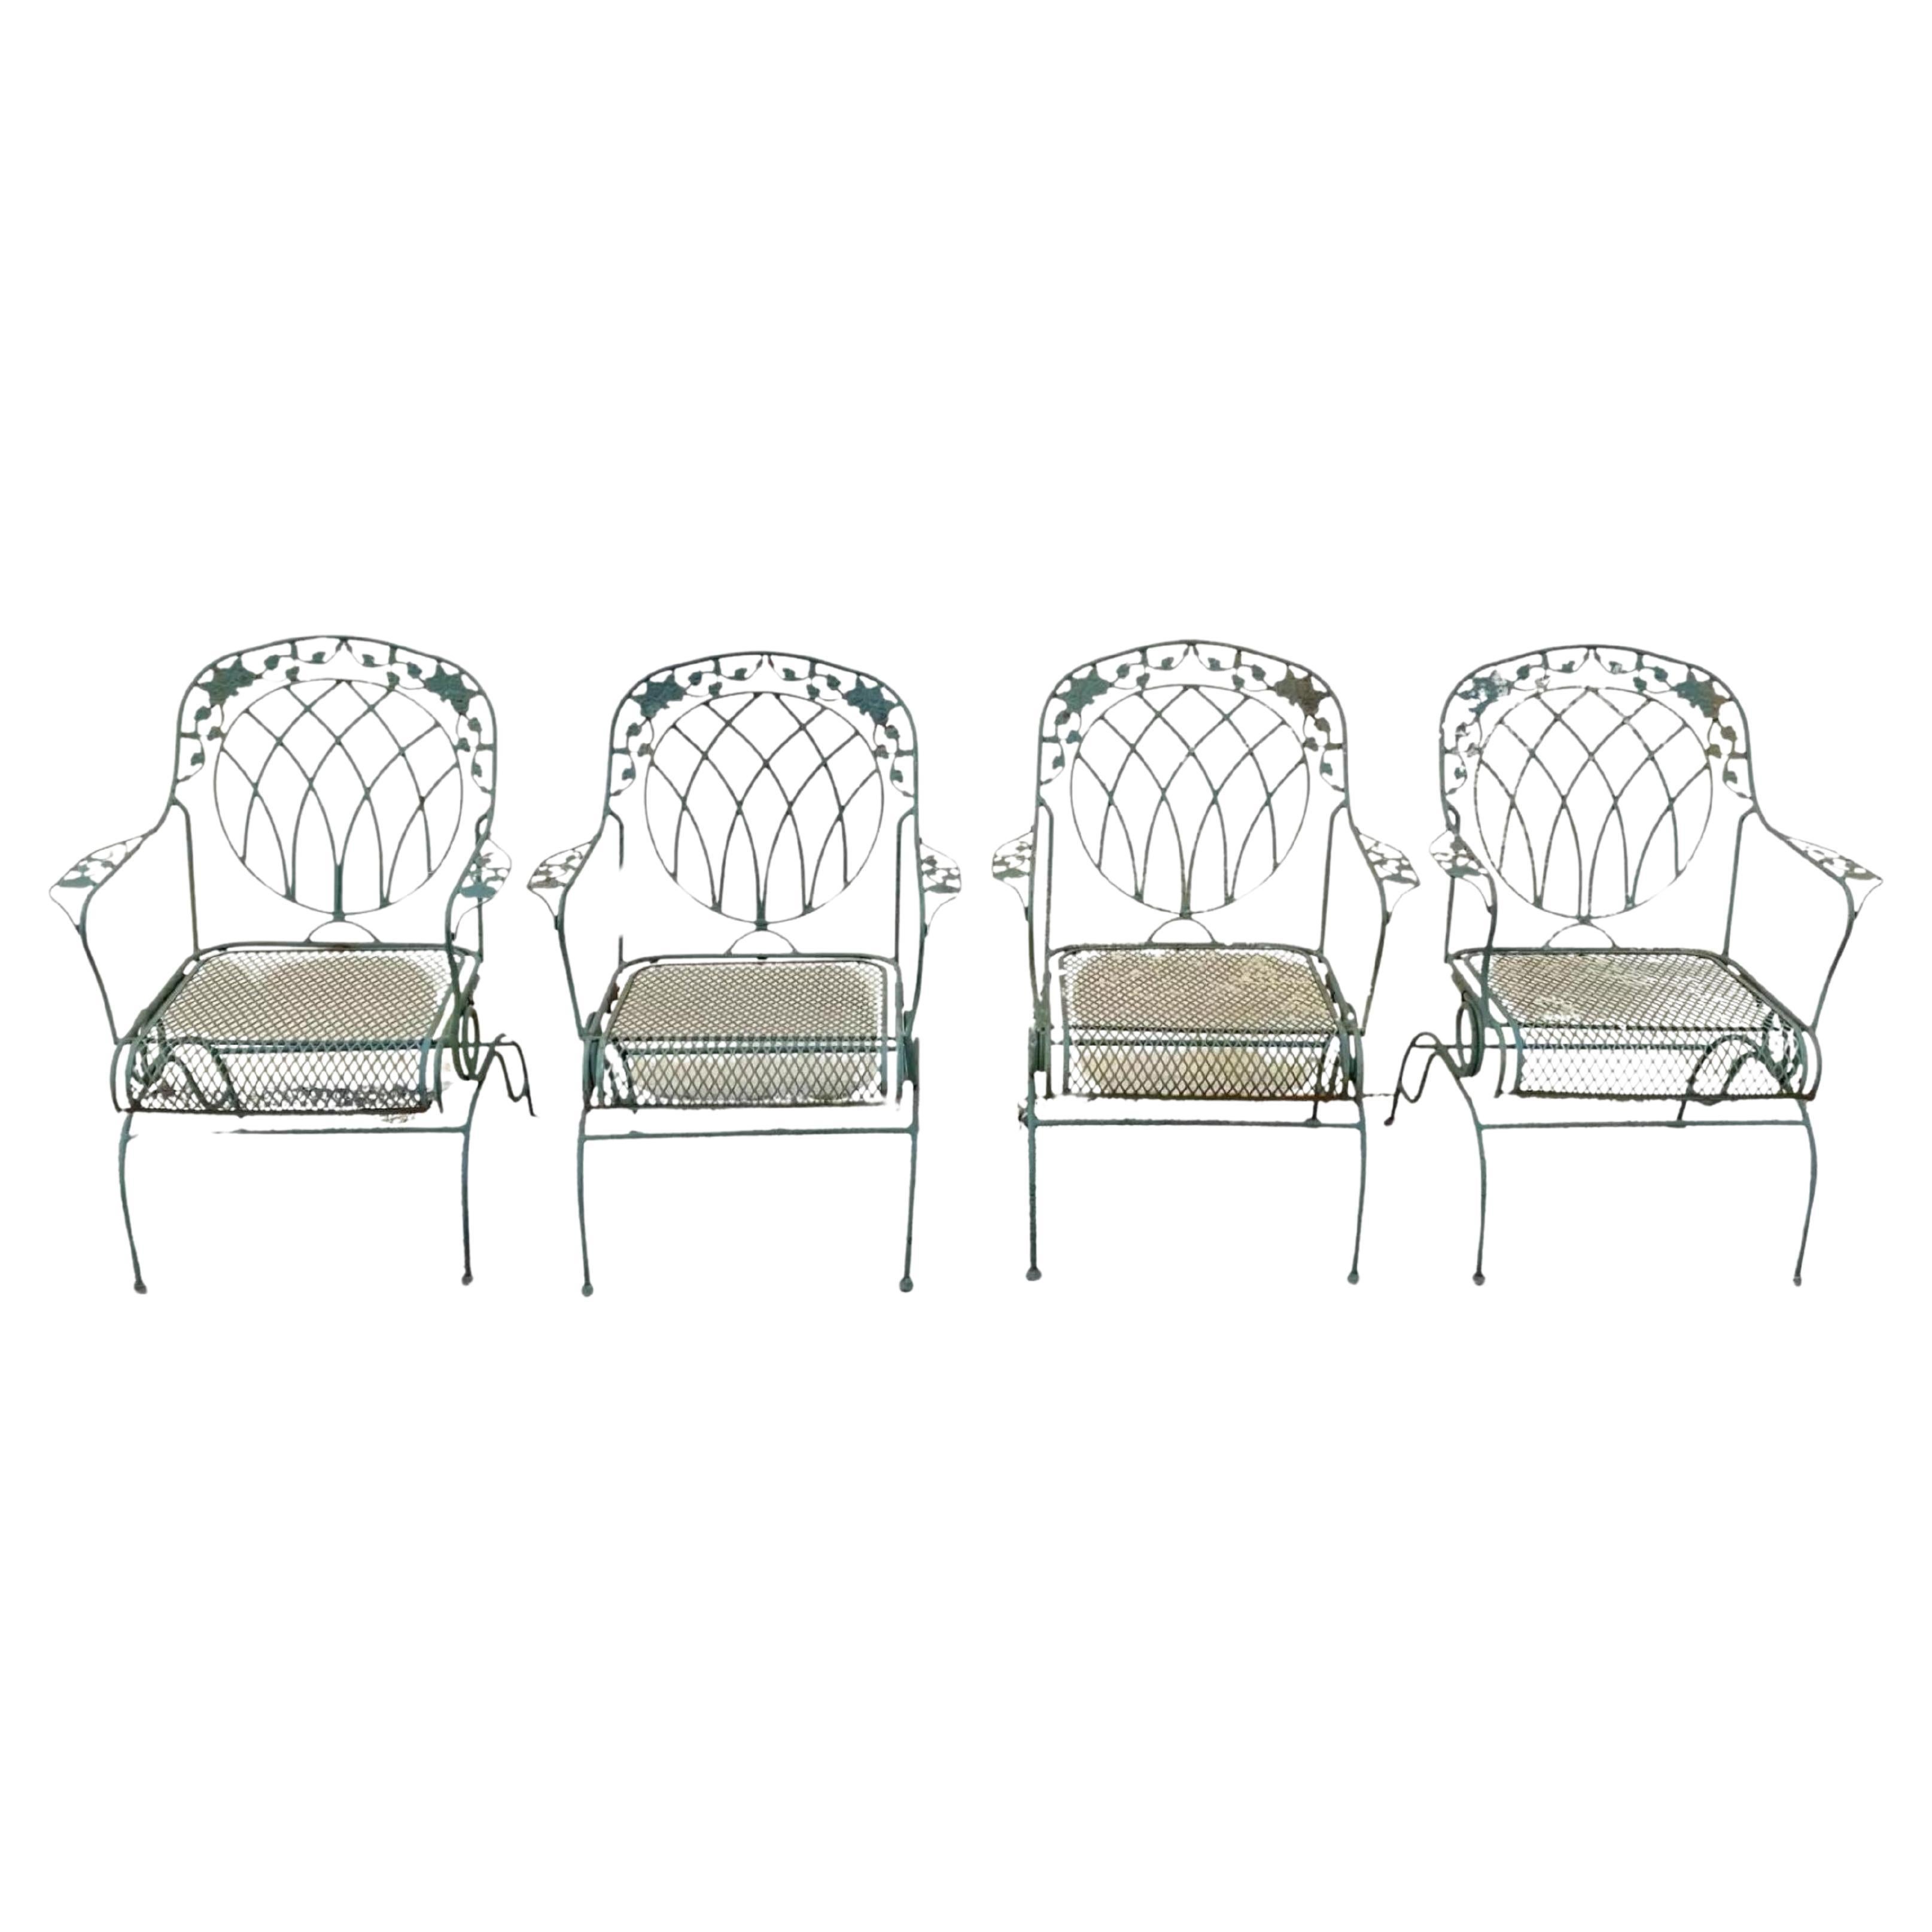 Wrought Iron Green Woodard Rose Style Garden Patio Springer Chairs - Set of 4 For Sale